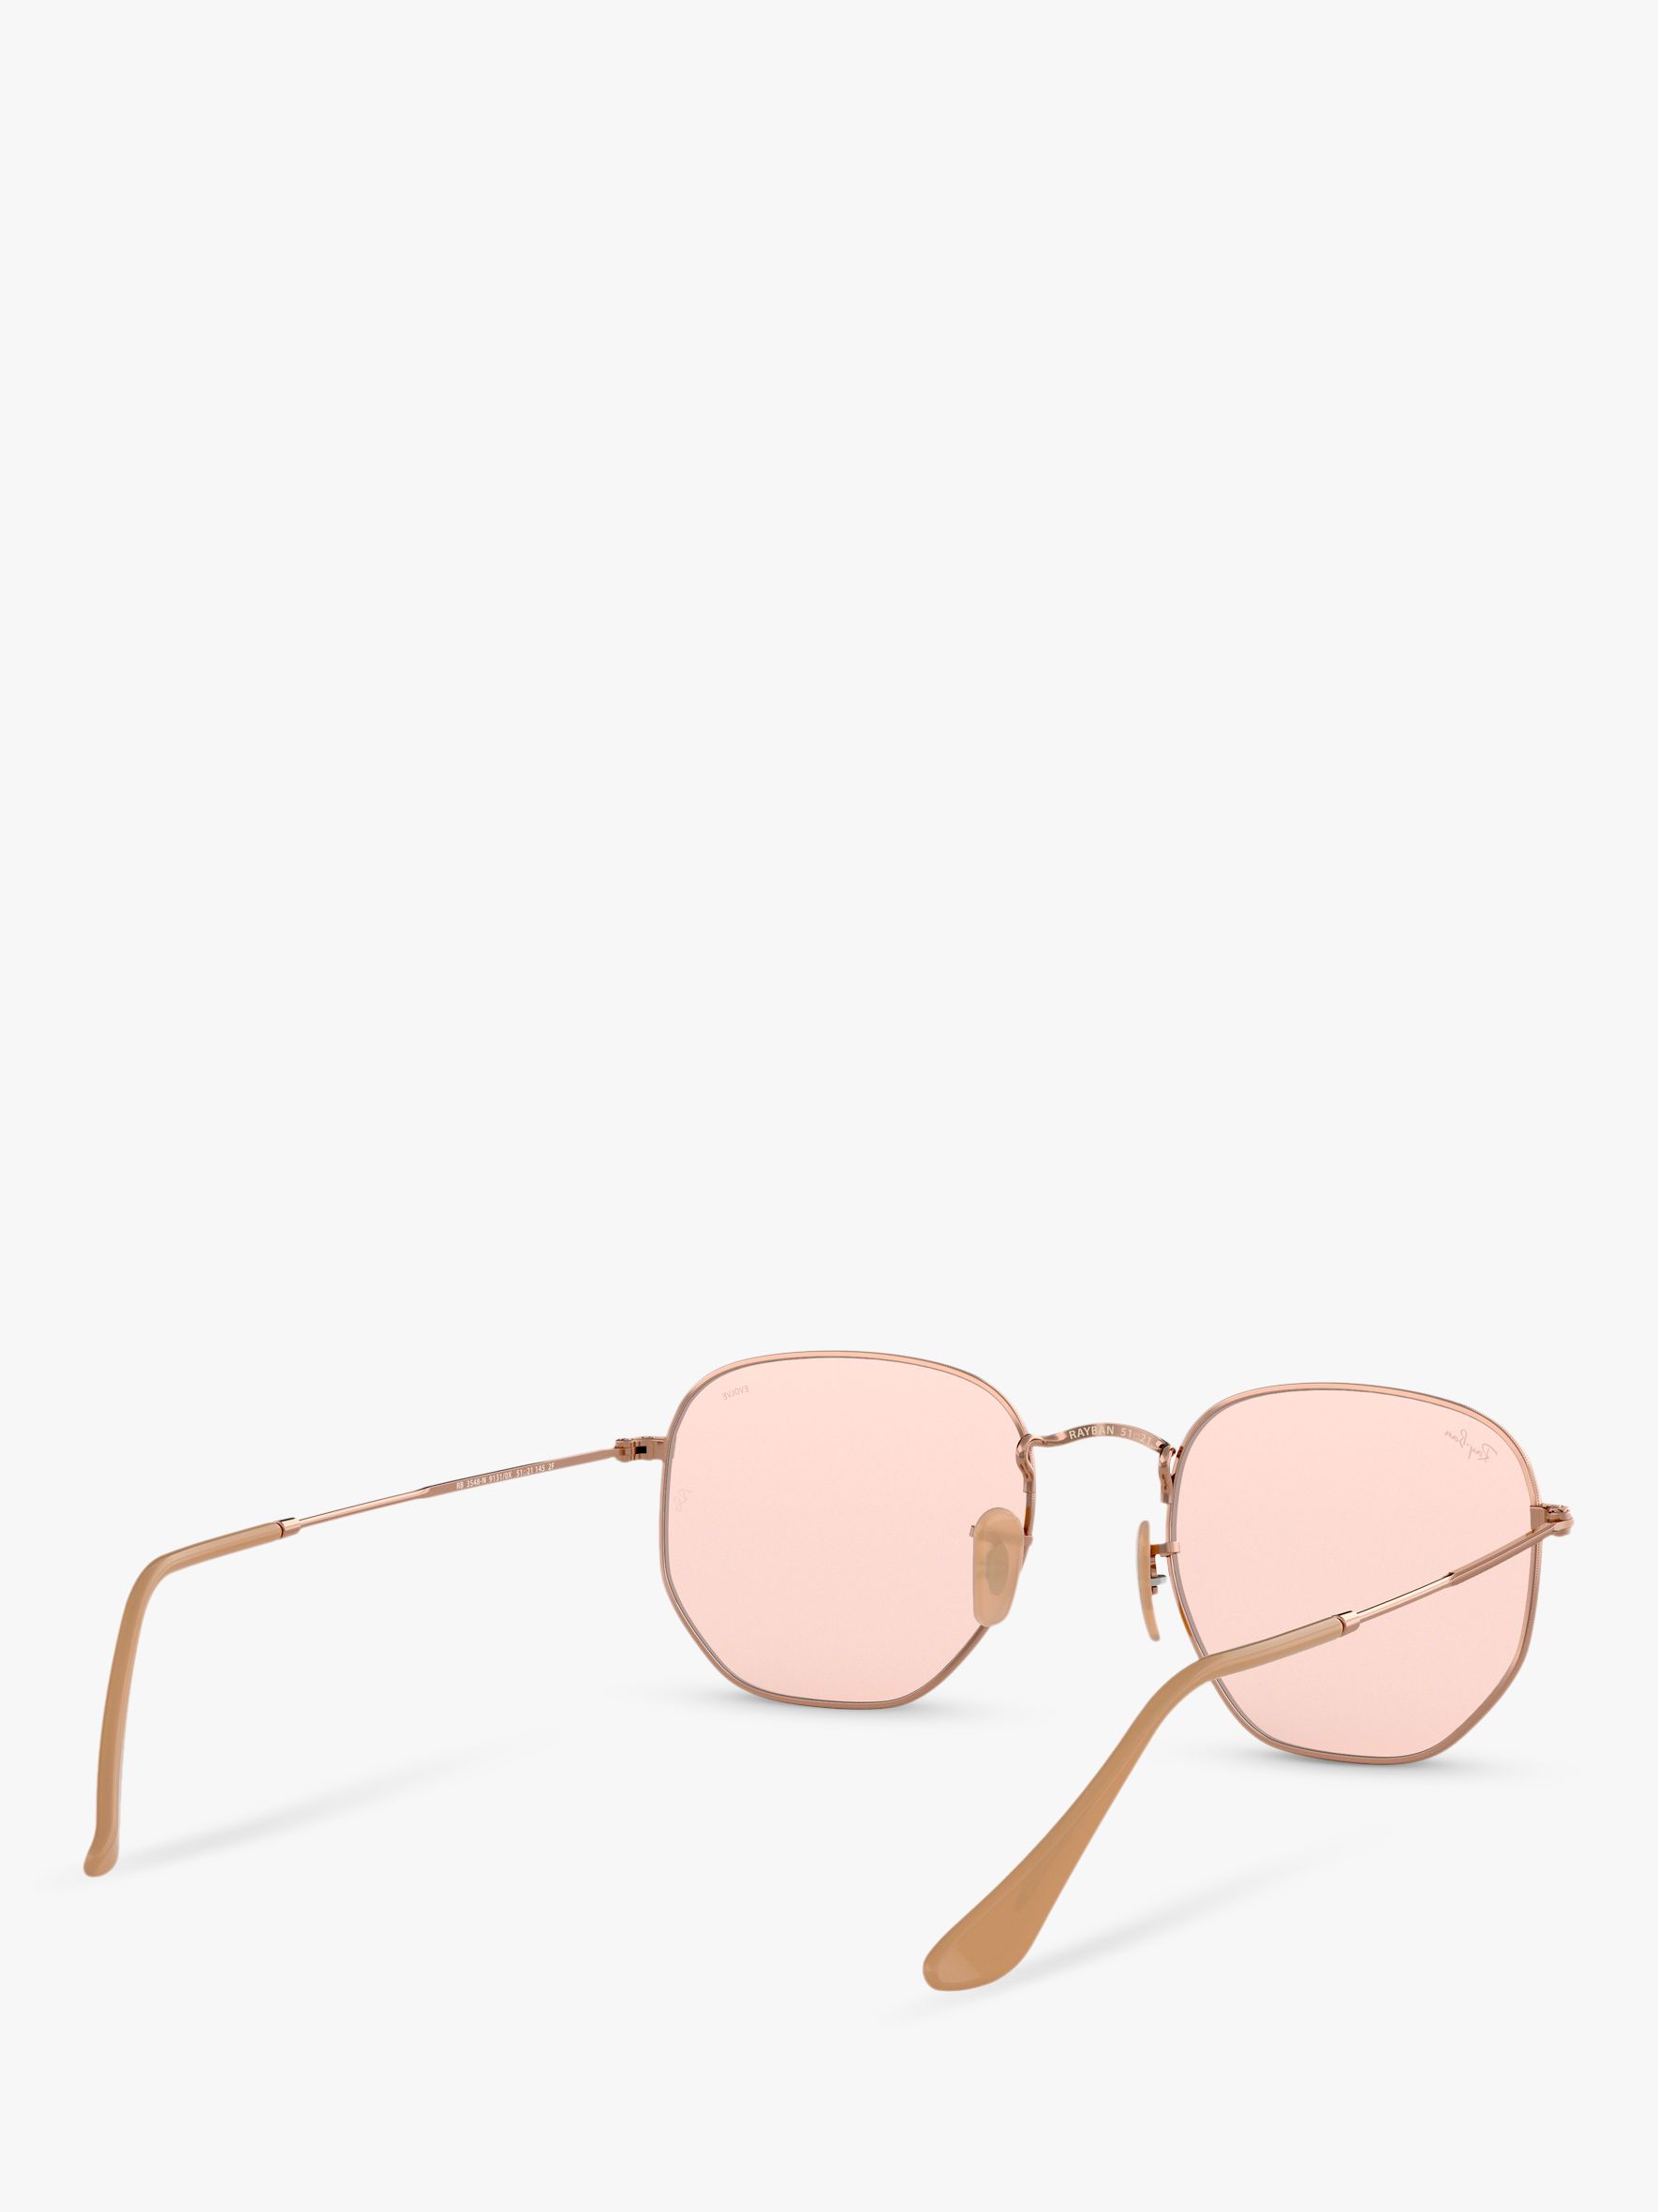 Ray Ban Rb3548n Hexgonal Sunglasses Copper Pink At John Lewis And Partners